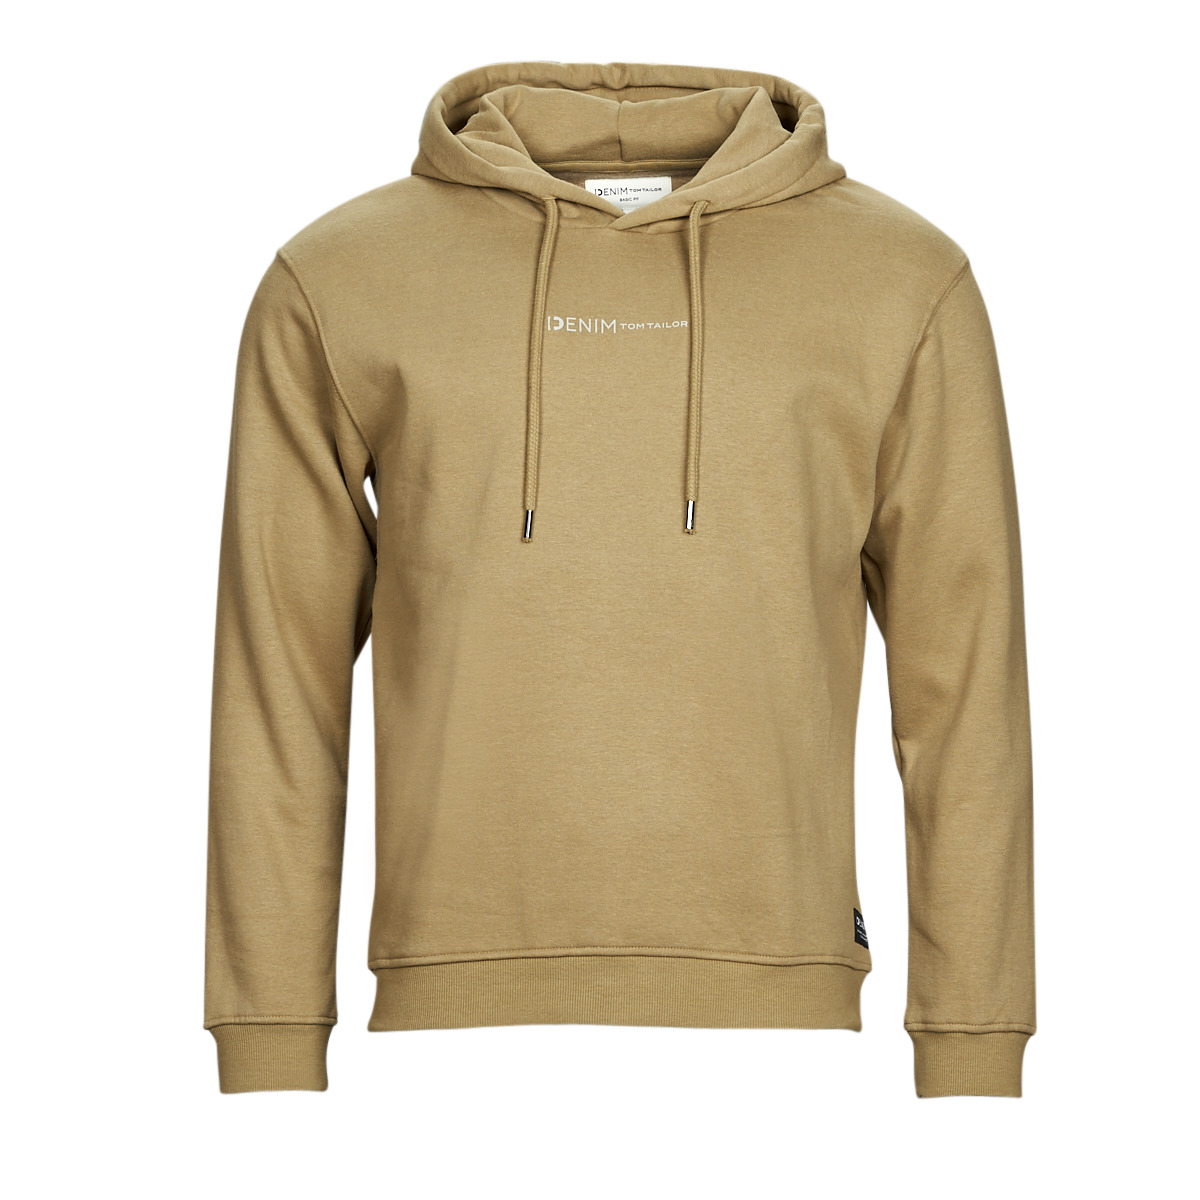 Tom Tailor HOODIE Men Fast sweaters Clothing Spartoo Camel 44,00 - - Europe € delivery | 